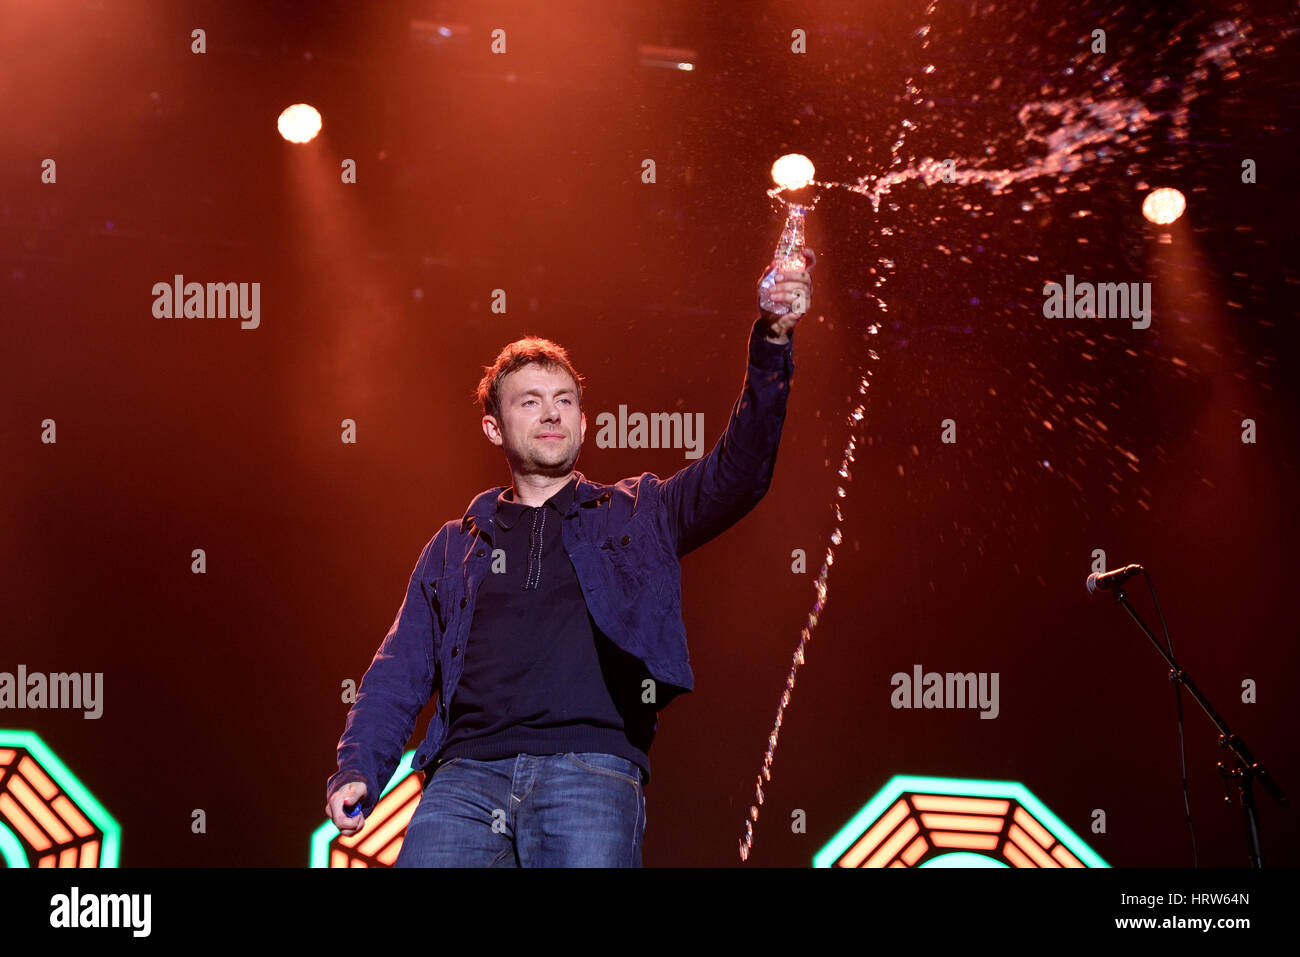 BENICASSIM, SPAIN - JUL 18: Blur (band) in concert at FIB Festival on July 18, 2015 in Benicassim, Spain. Stock Photo